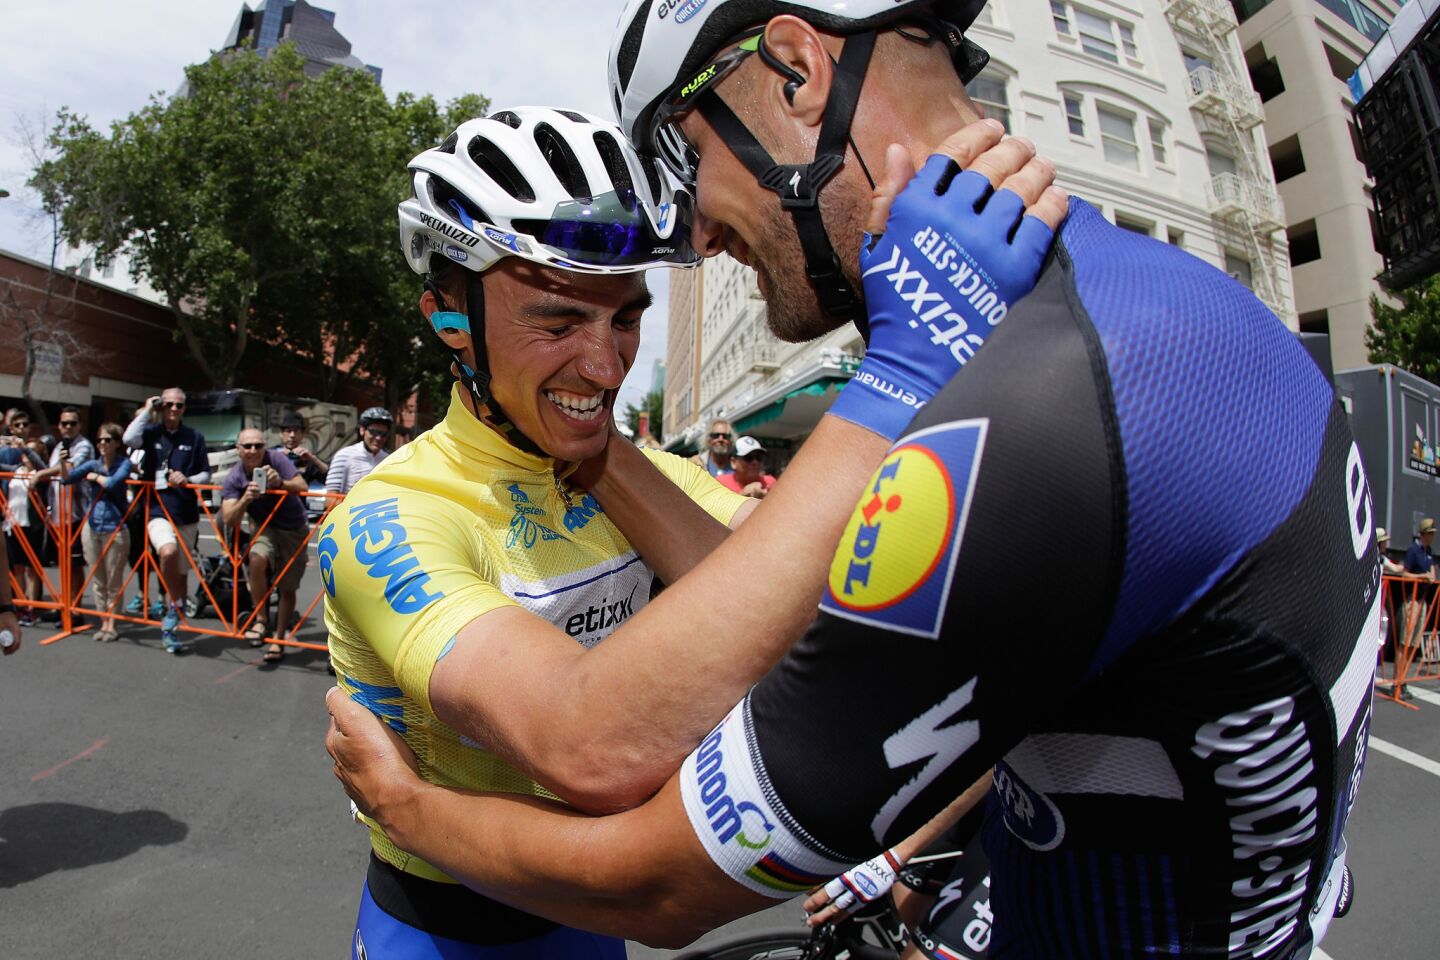 Julian Alaphilippe, left, is congratulated by Etixx/Quick-Step teammate Tom Boonen after clinching the overall title for the Amgen Tour of California on May 22 in Sacramento.